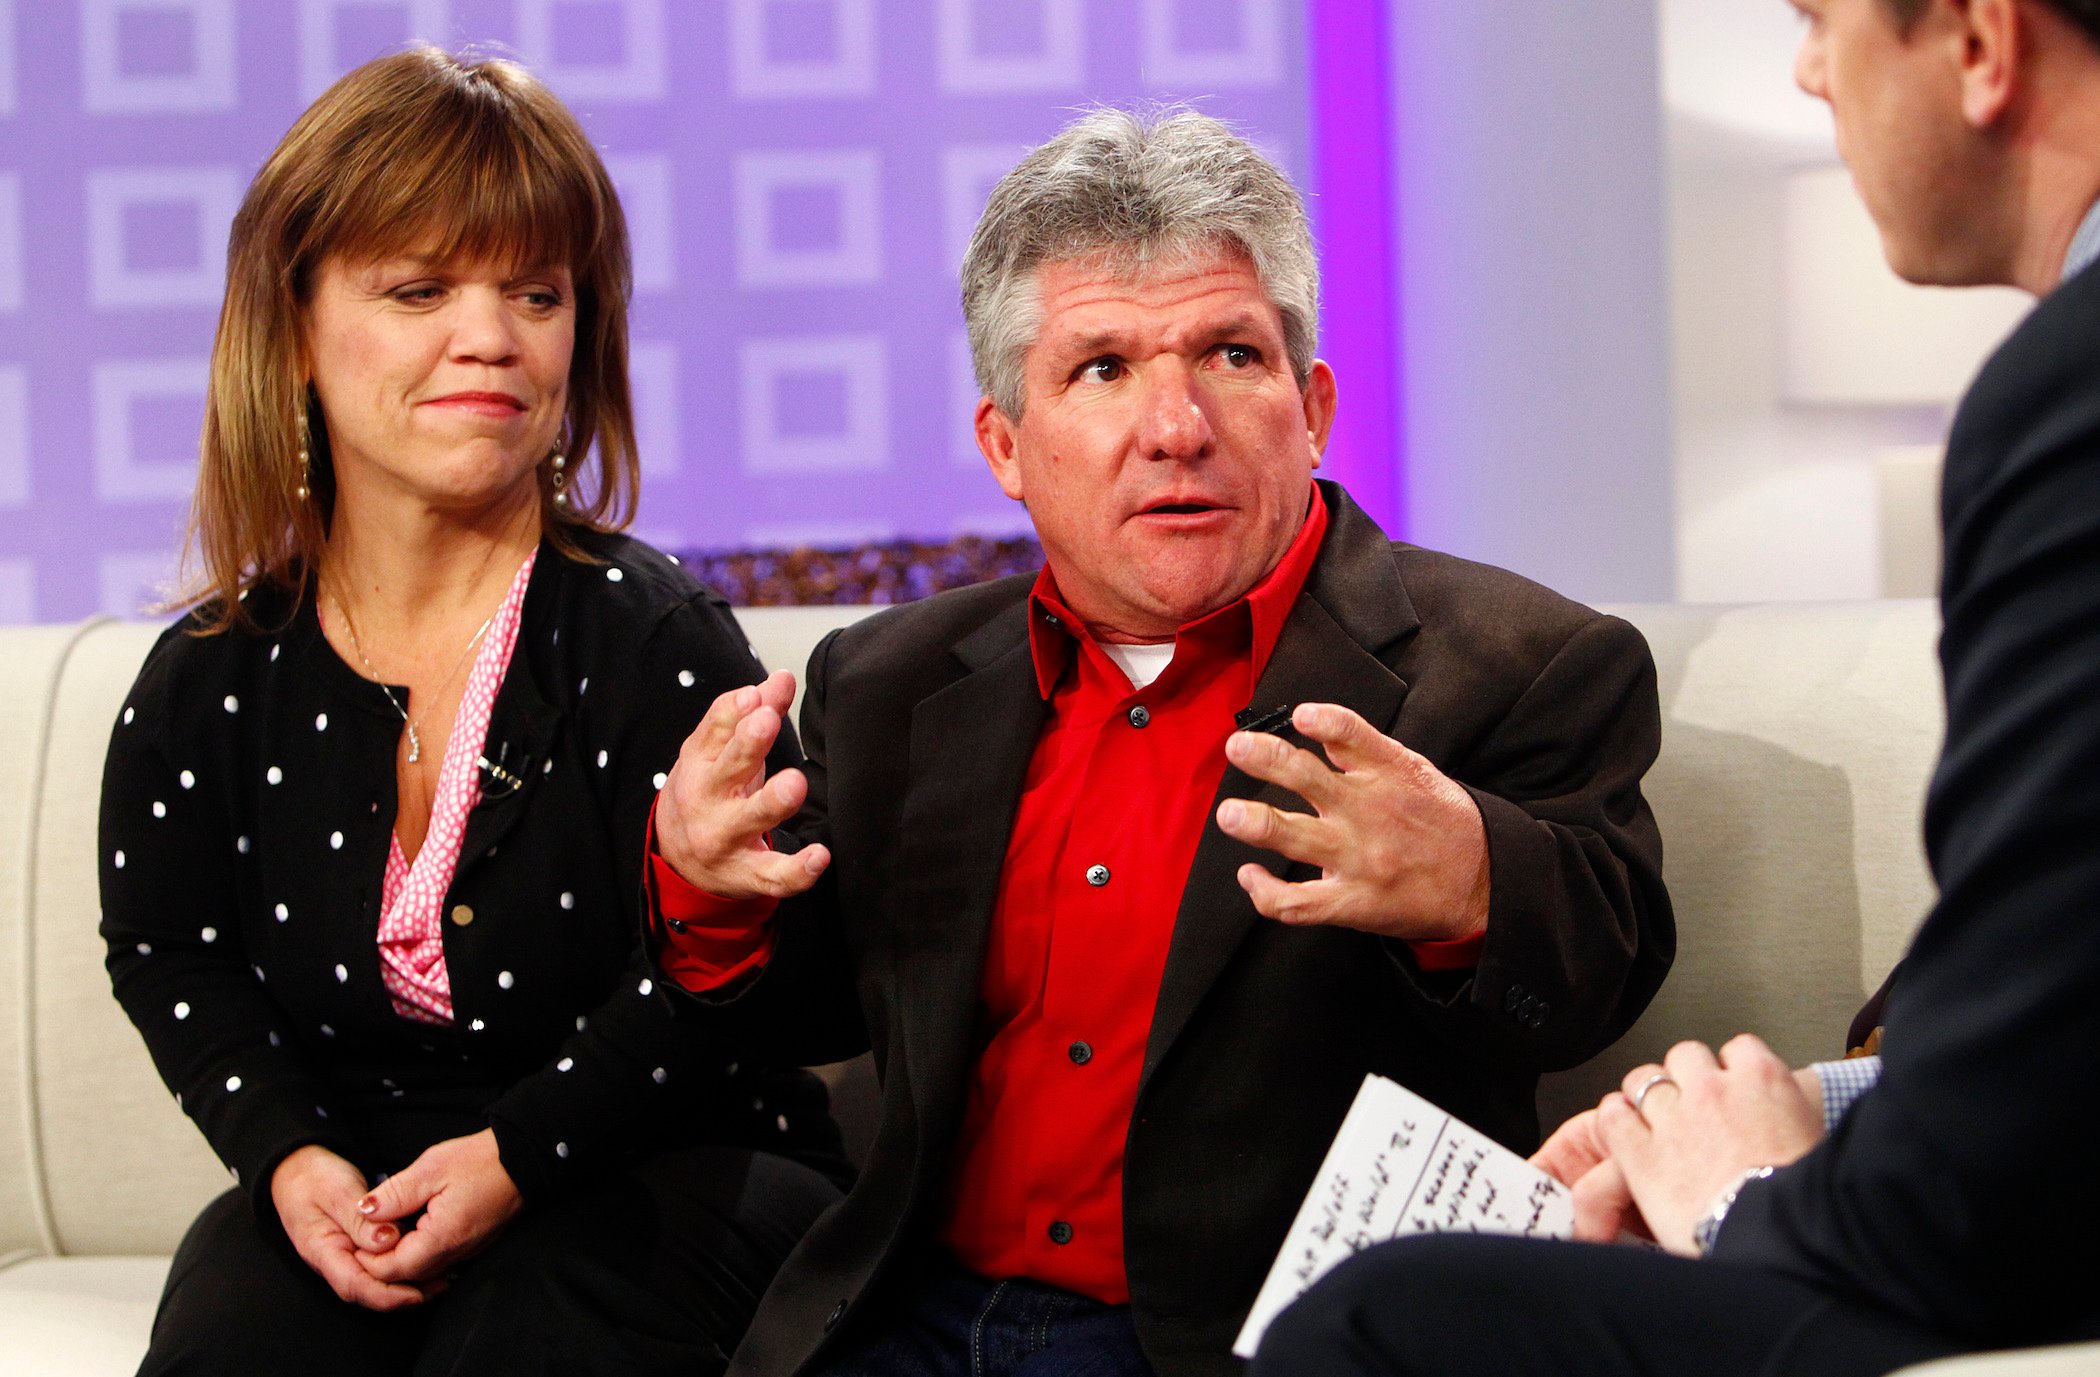 Jacob Roloff's parents, Amy Roloff and Matt Roloff from 'Little People, Big World,' appear on NBC News' 'Today' show sitting side by side on a sofa